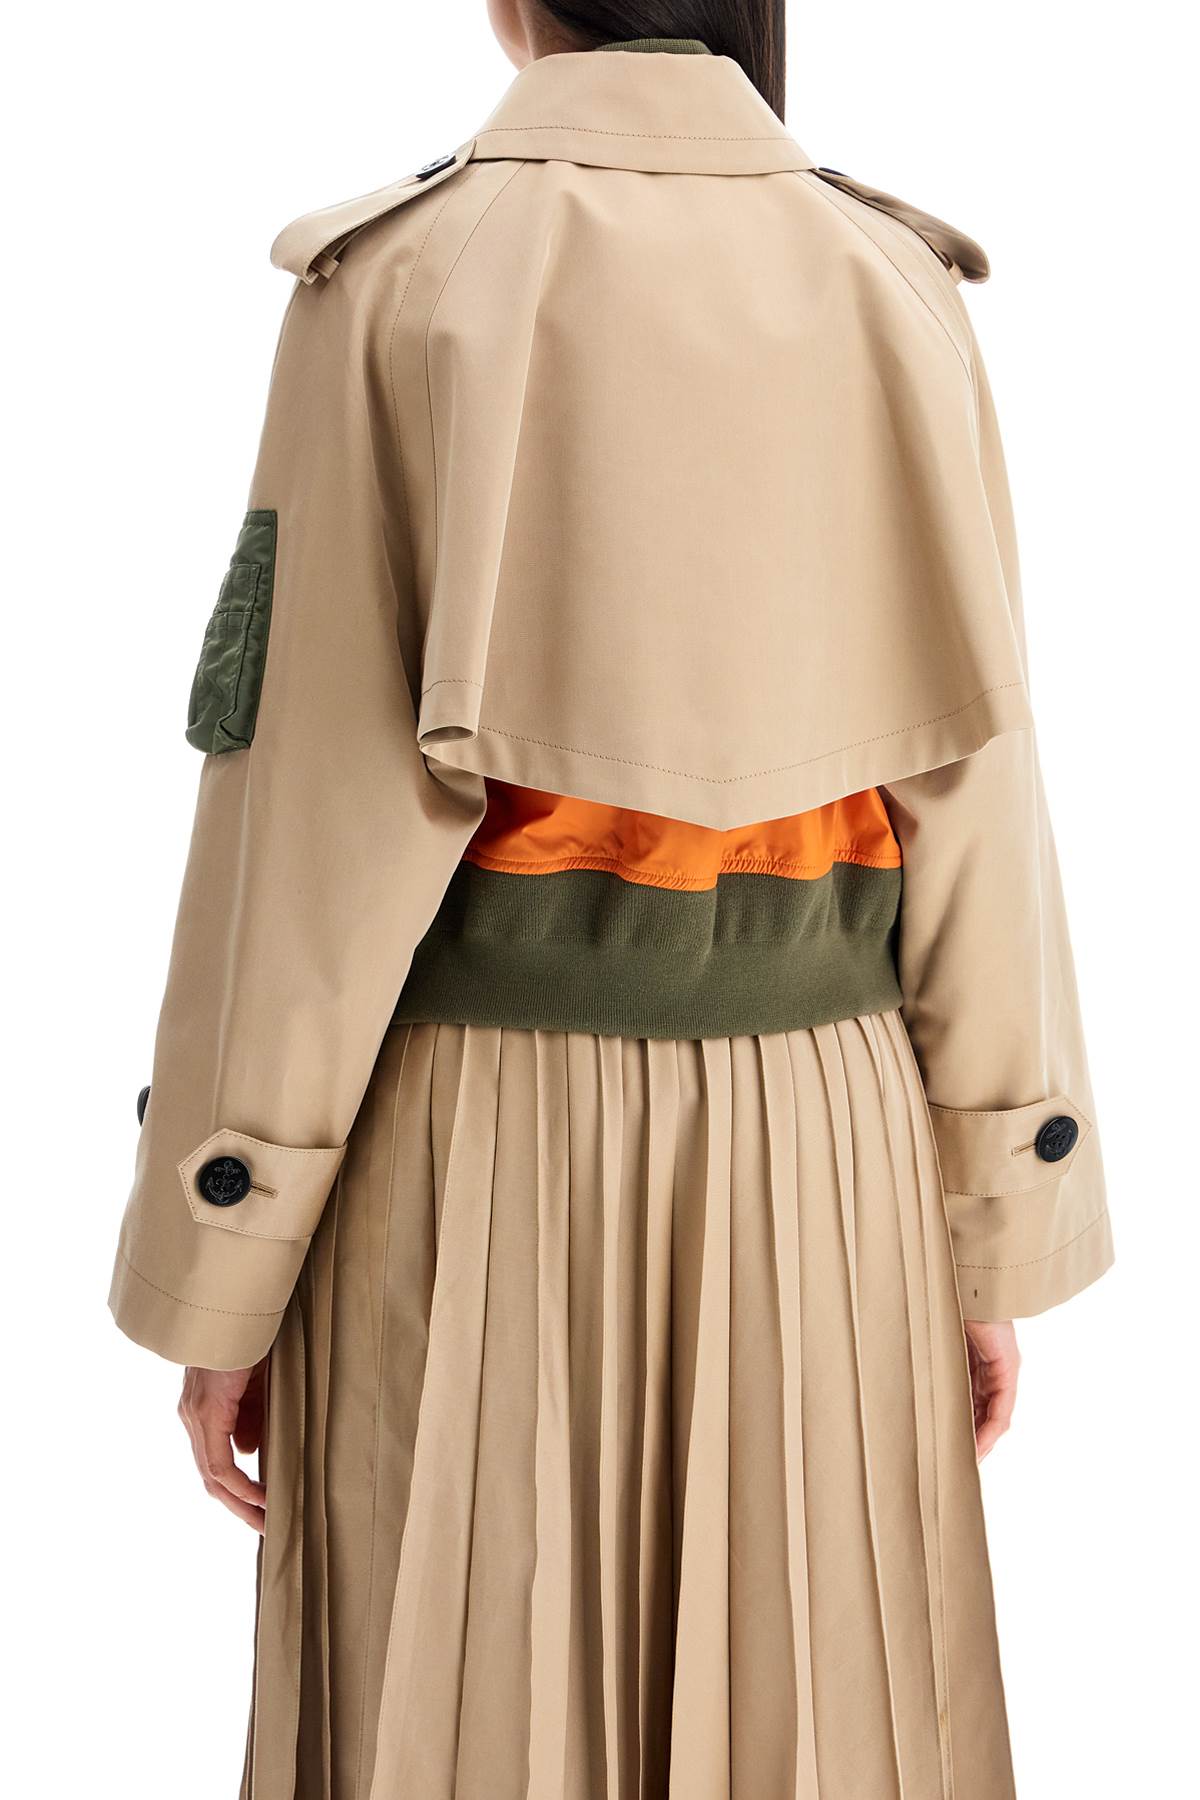 layered effect trench-style blous-2